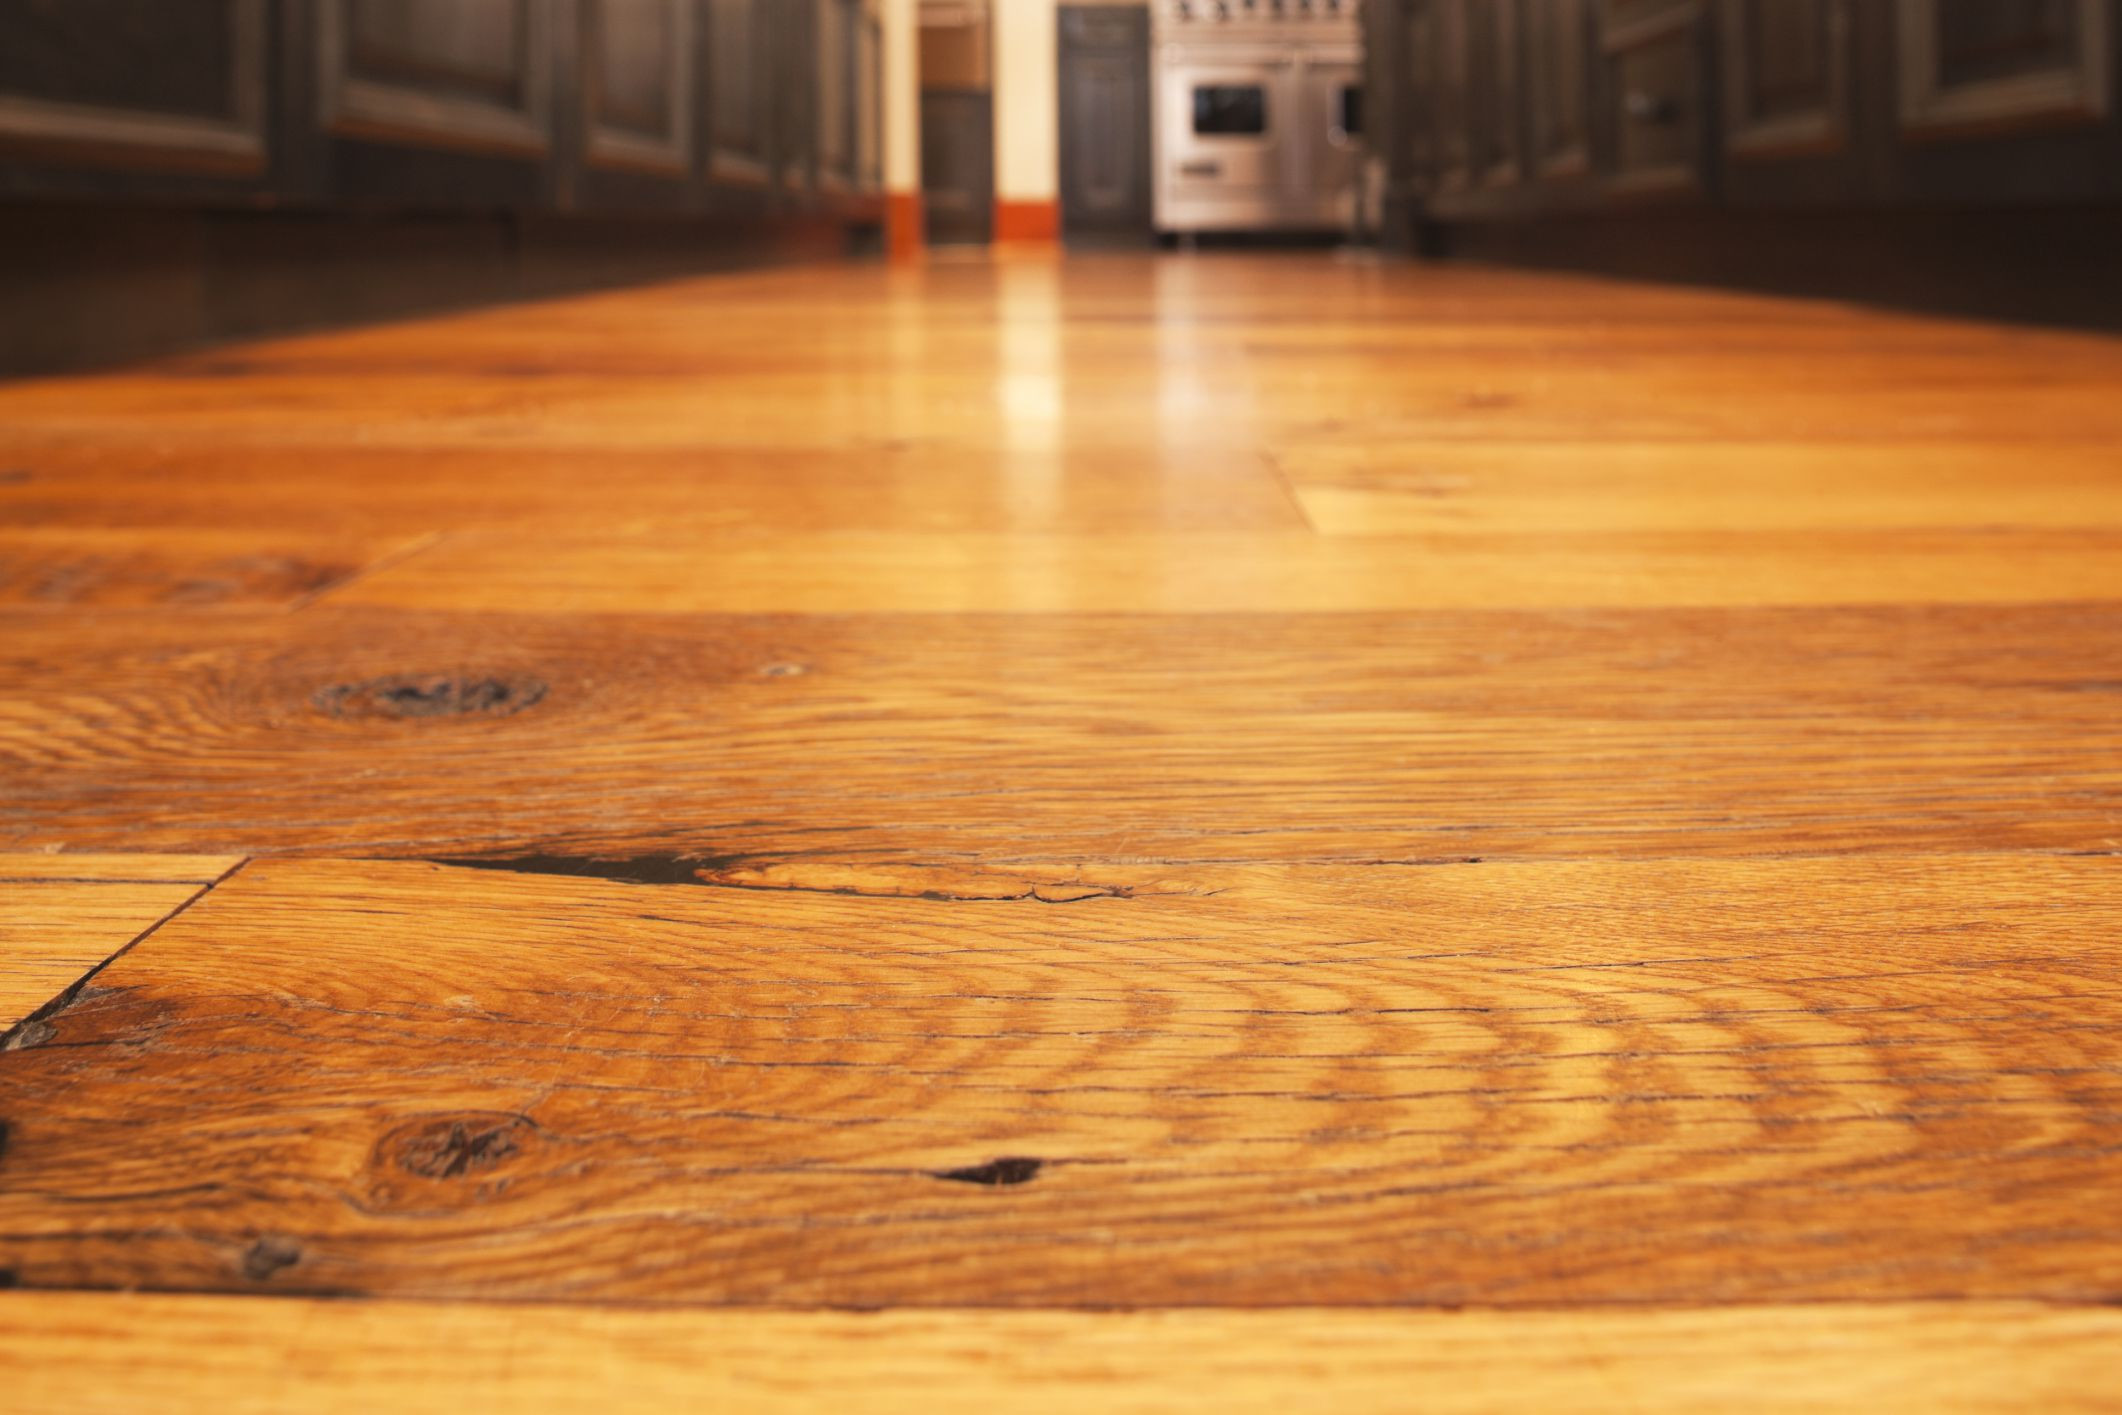 13 Recommended Hardwood Flooring Over Concrete Subfloor 2024 free download hardwood flooring over concrete subfloor of above grade floors that do not belong in basements within wood floor closeup microbevel 56a4a13f5f9b58b7d0d7e5f4